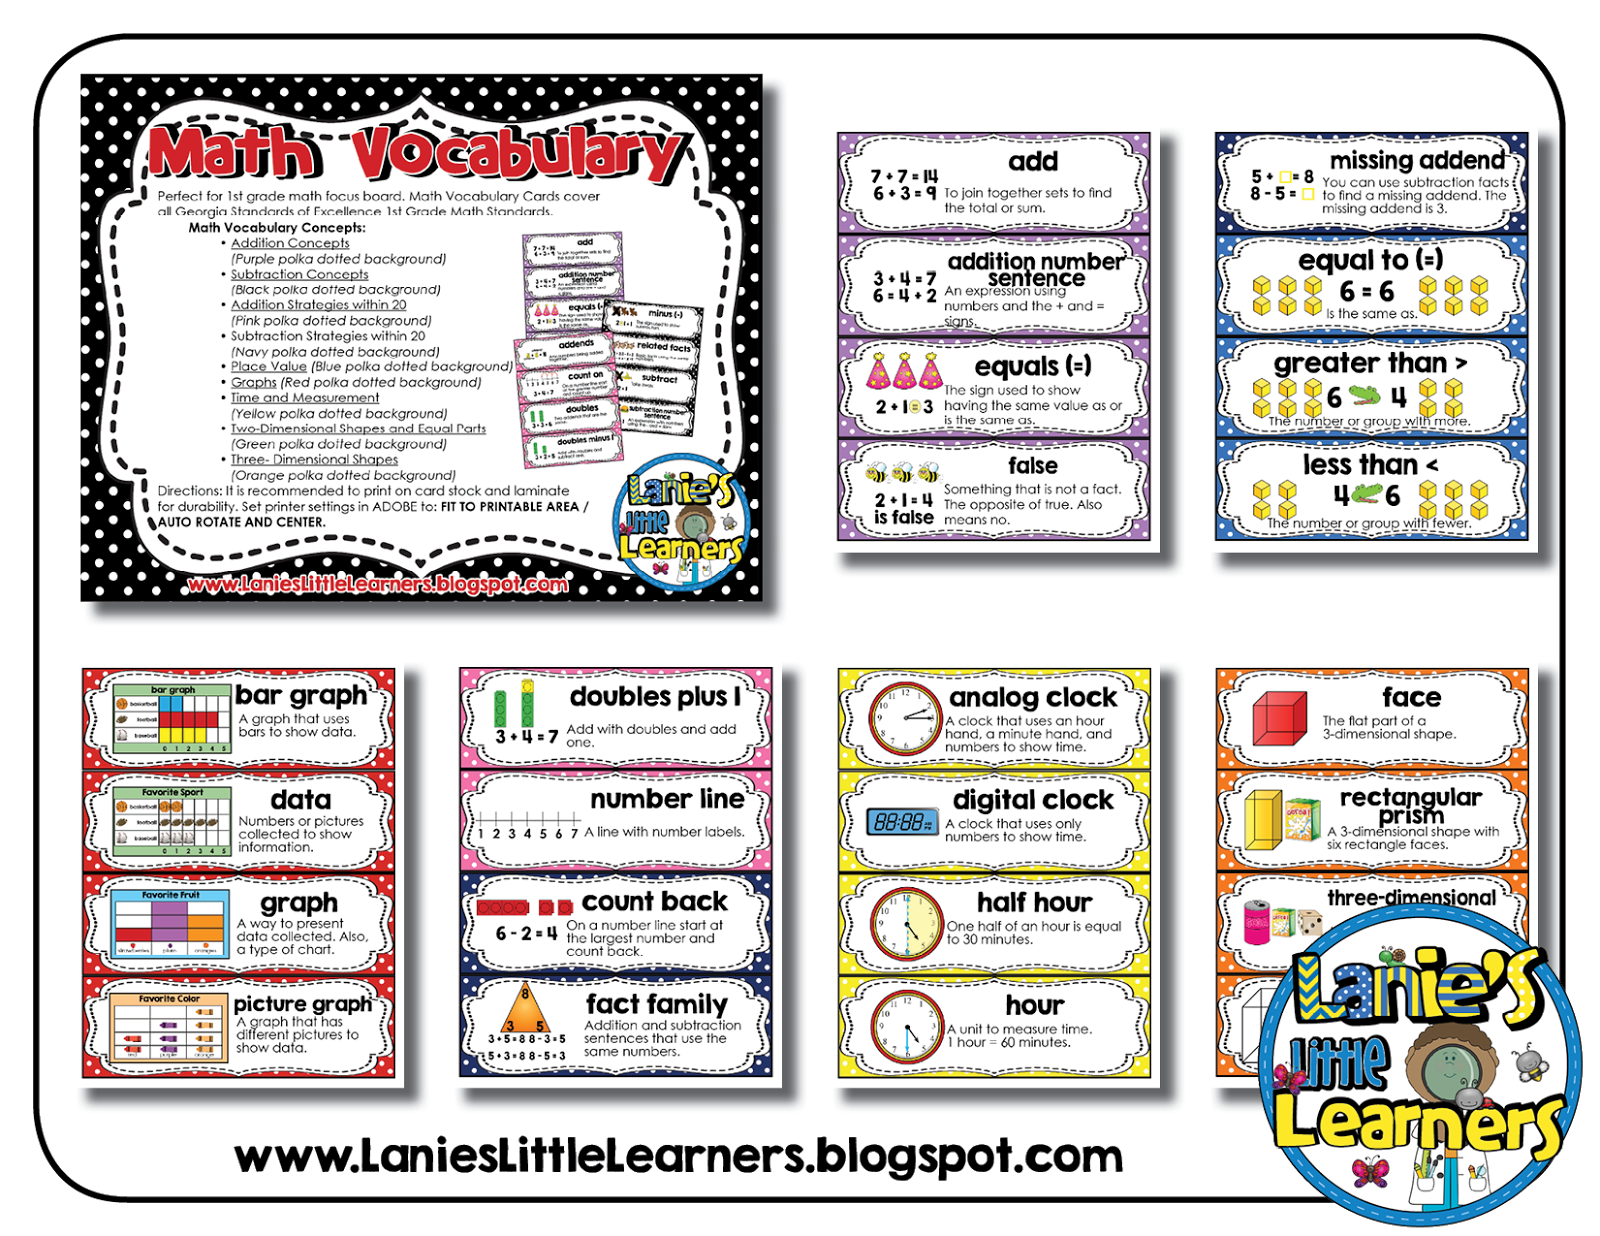 lanie-s-little-learners-math-vocabulary-1st-grade-printables